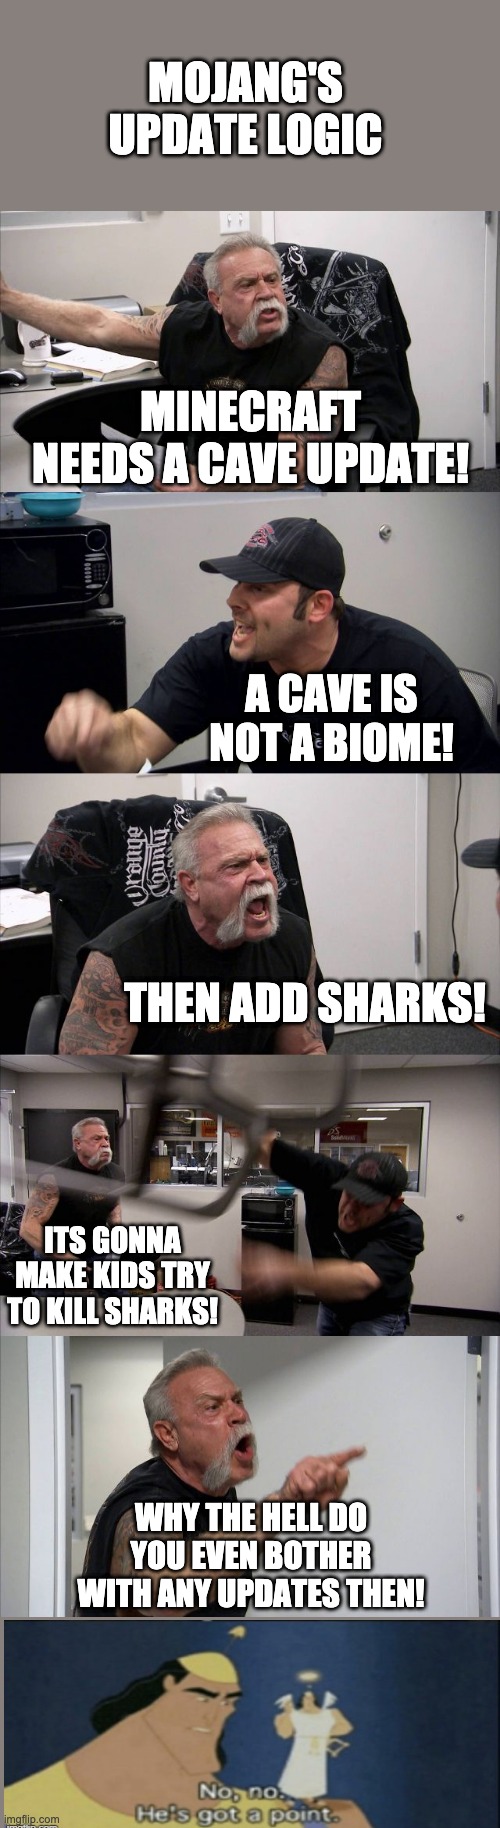 American Chopper Argument | MOJANG'S UPDATE LOGIC; MINECRAFT NEEDS A CAVE UPDATE! A CAVE IS NOT A BIOME! THEN ADD SHARKS! ITS GONNA MAKE KIDS TRY TO KILL SHARKS! WHY THE HELL DO YOU EVEN BOTHER WITH ANY UPDATES THEN! | image tagged in memes,american chopper argument | made w/ Imgflip meme maker